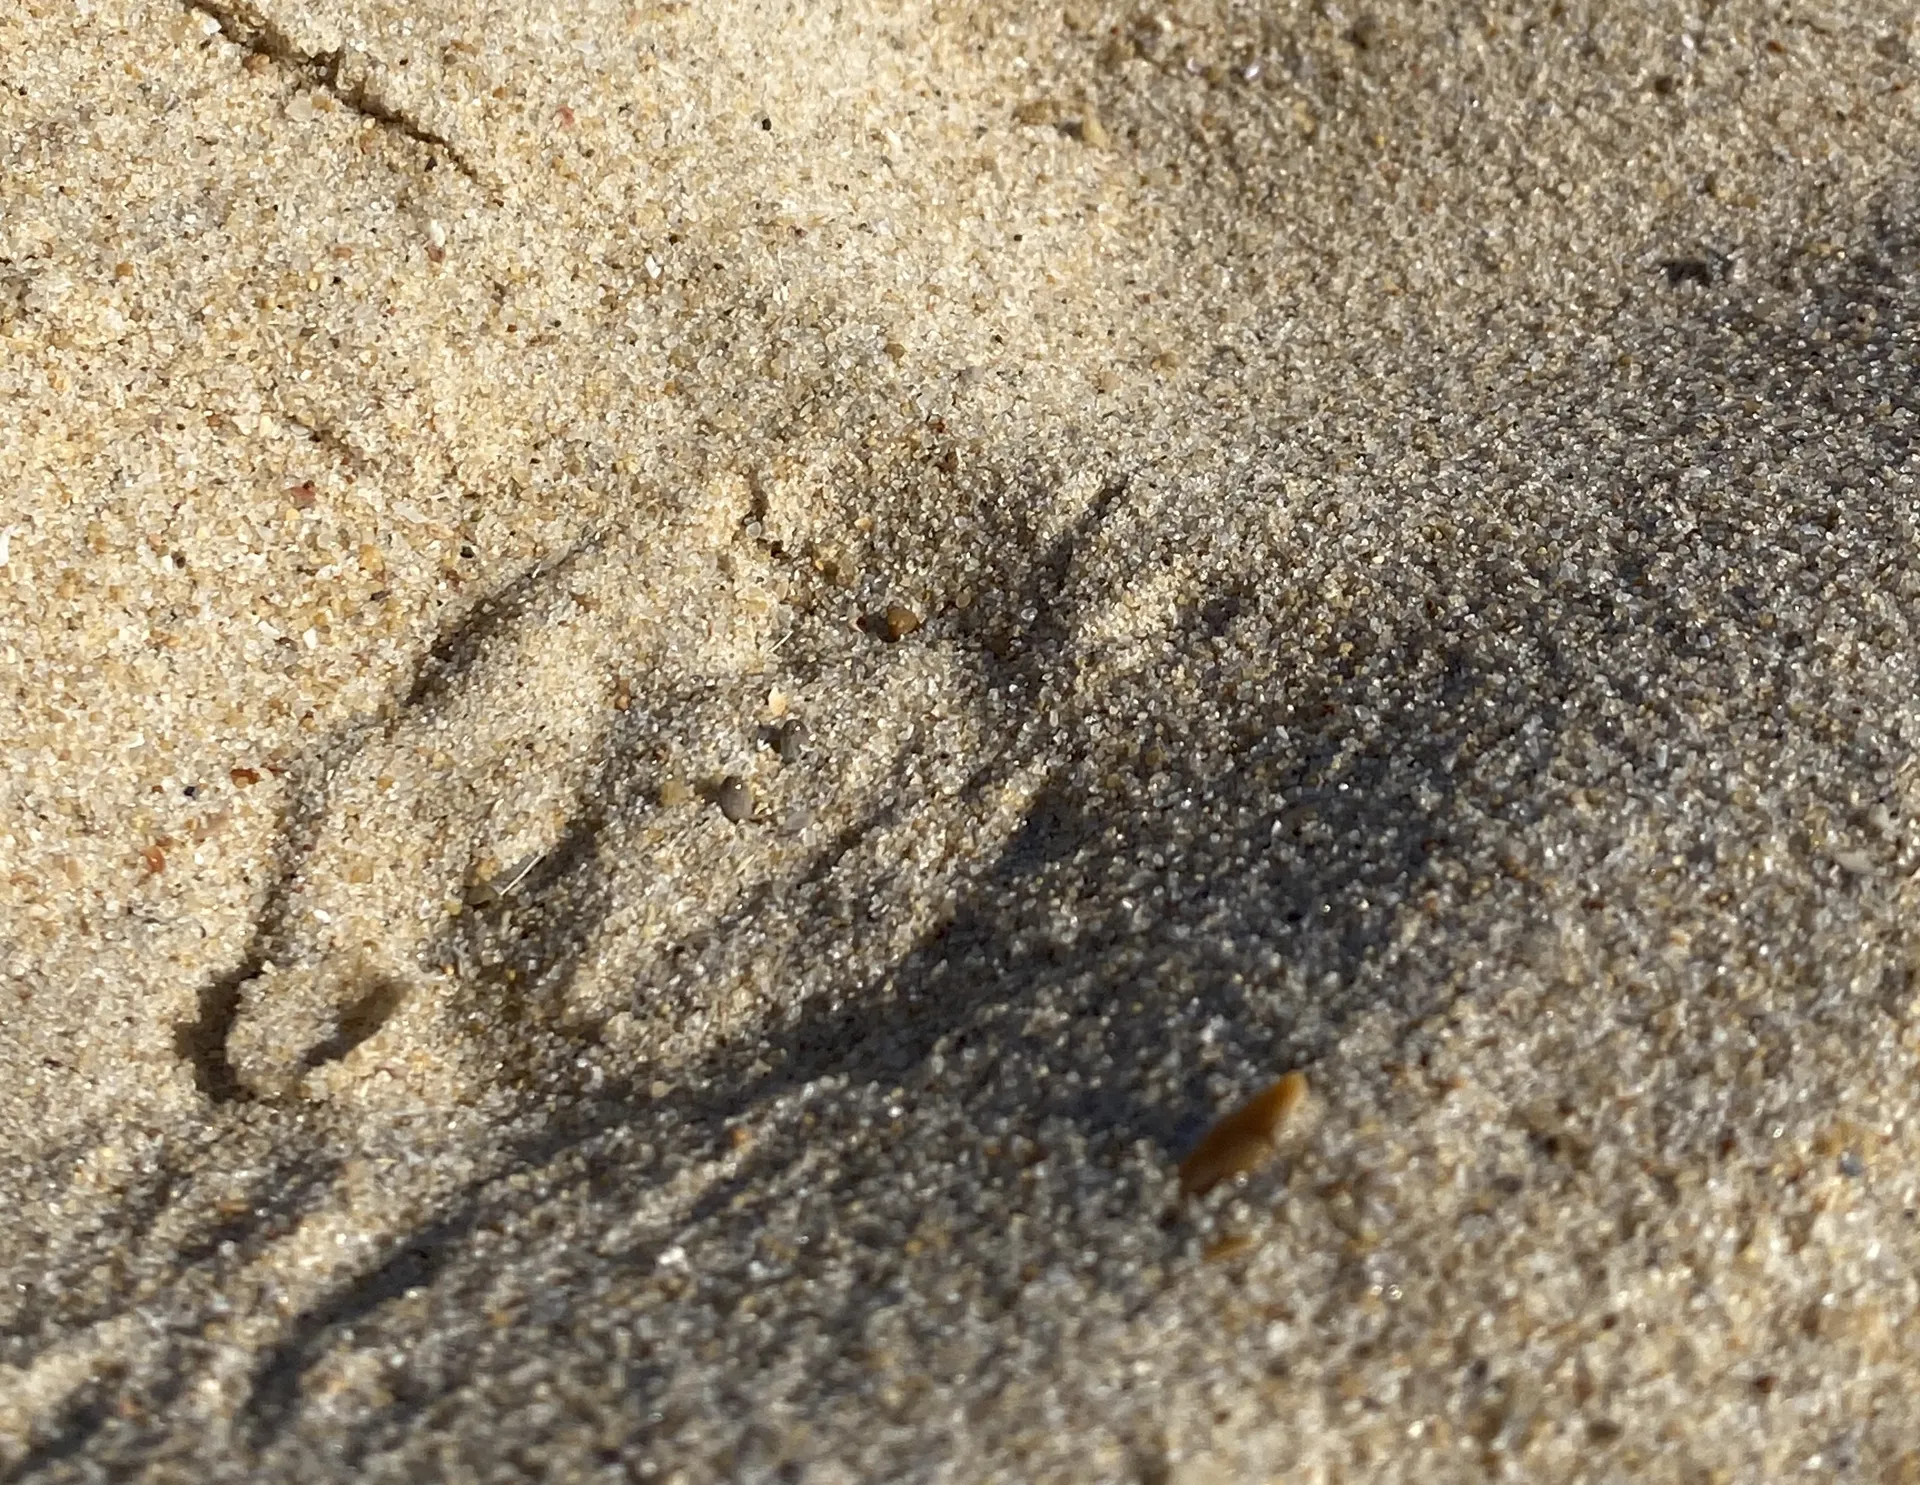 Can you spot the ghost crab hiding in this image? Hint: only its eyestalks are showing!